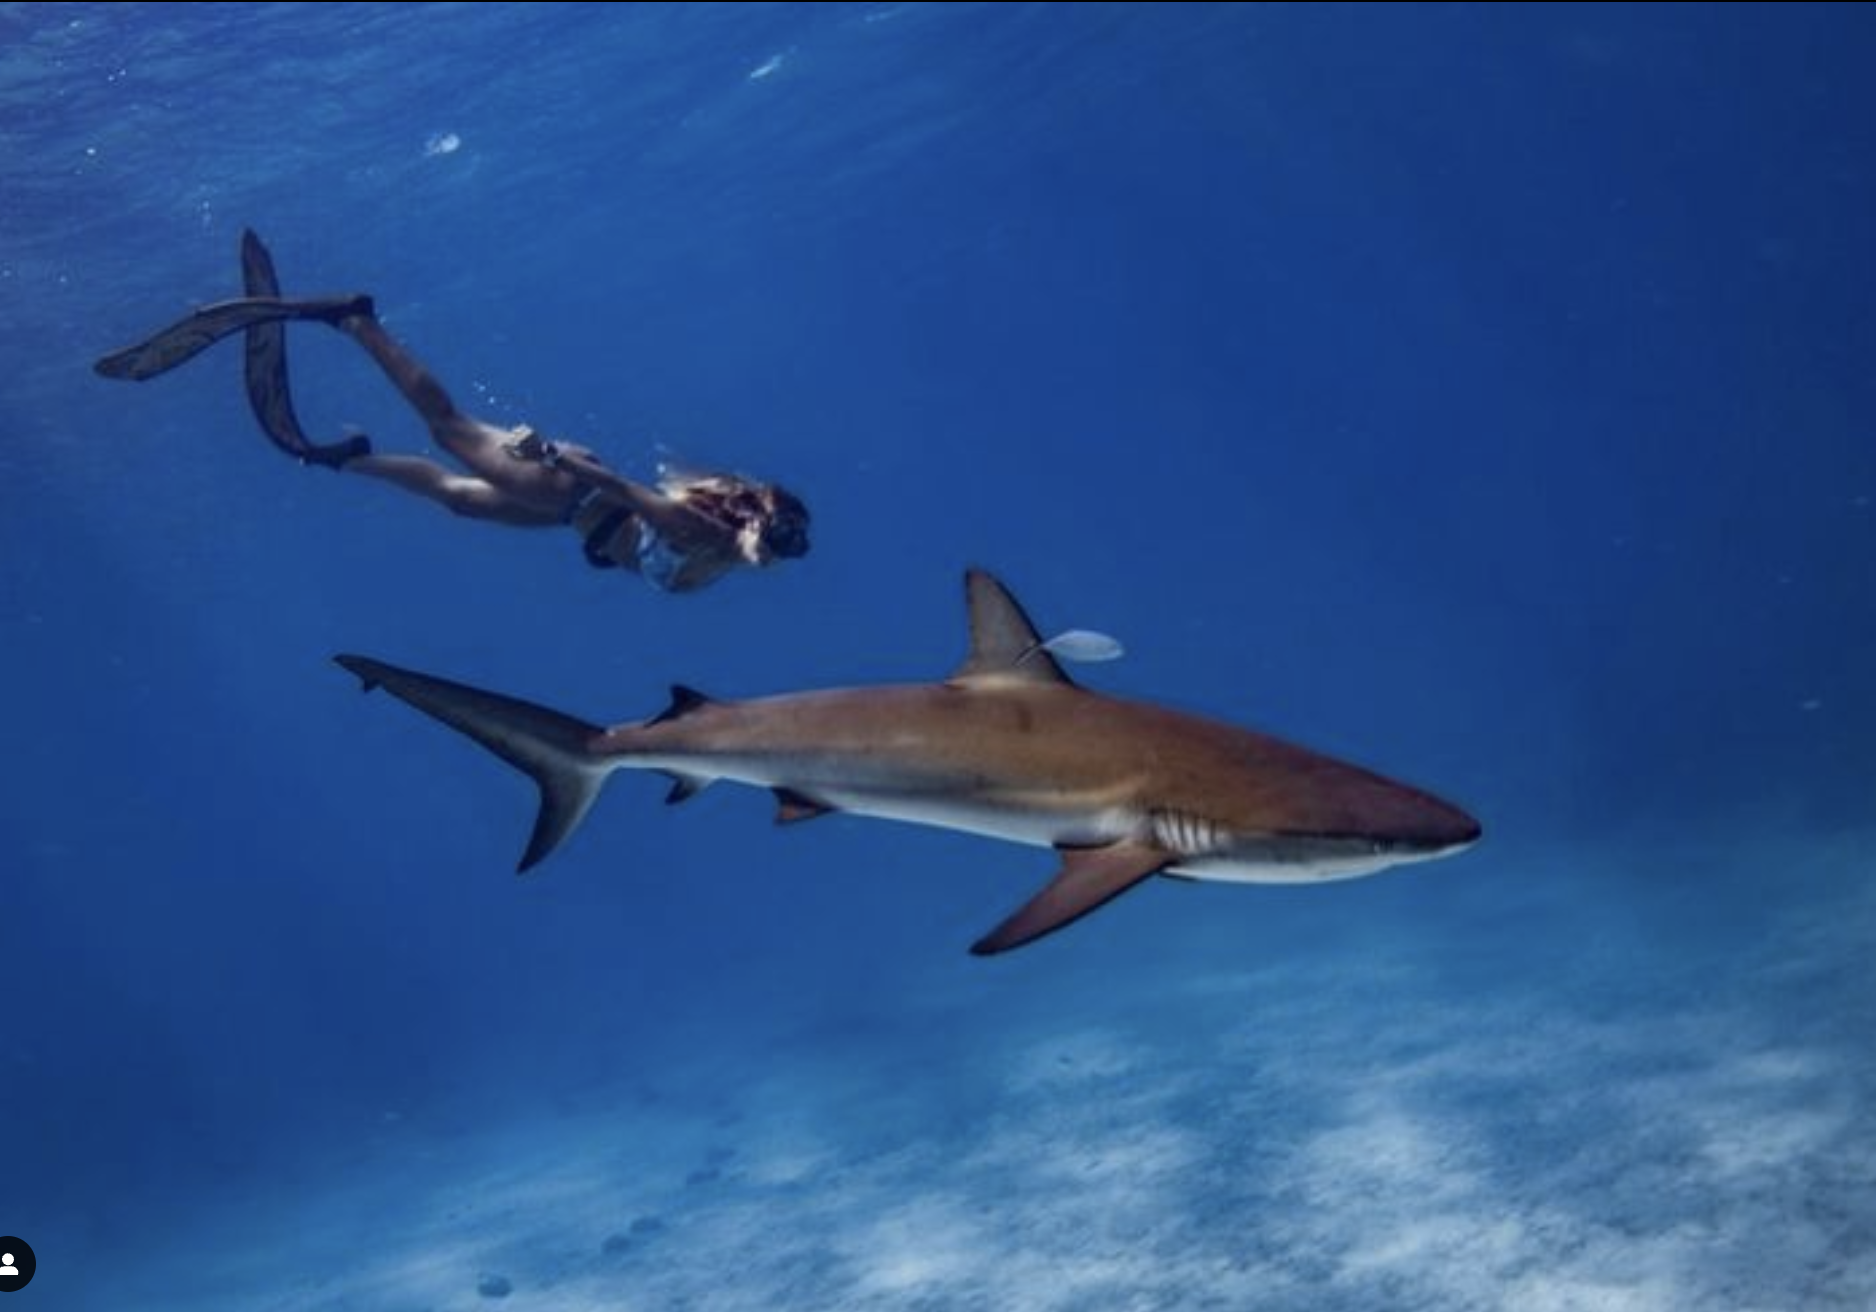 Steph Schuldt Freediving With Shark